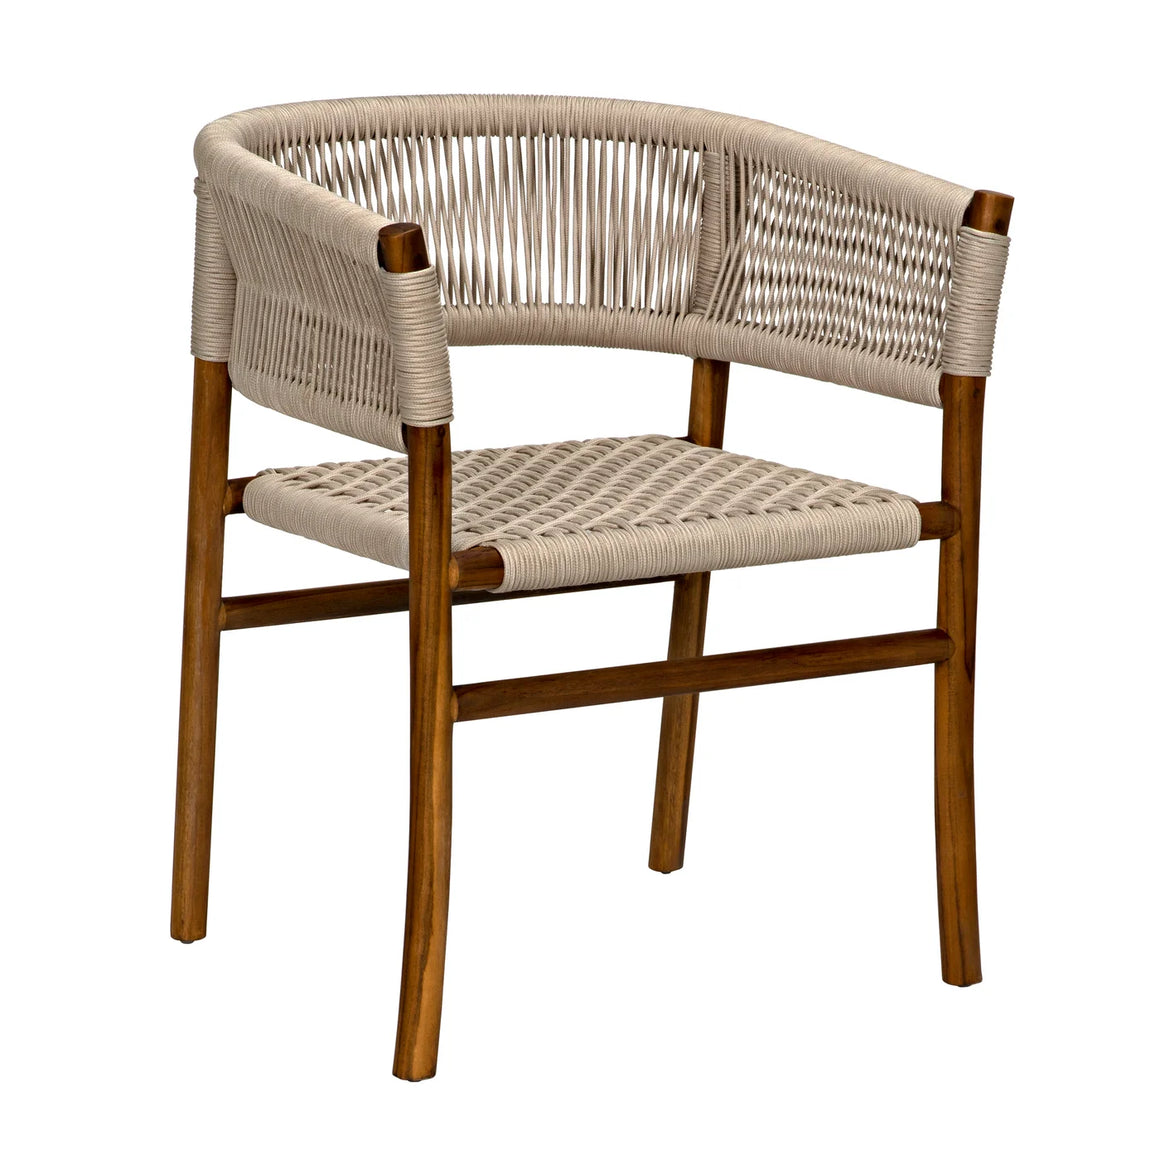 Conrad Chair - Teak with Woven Rope